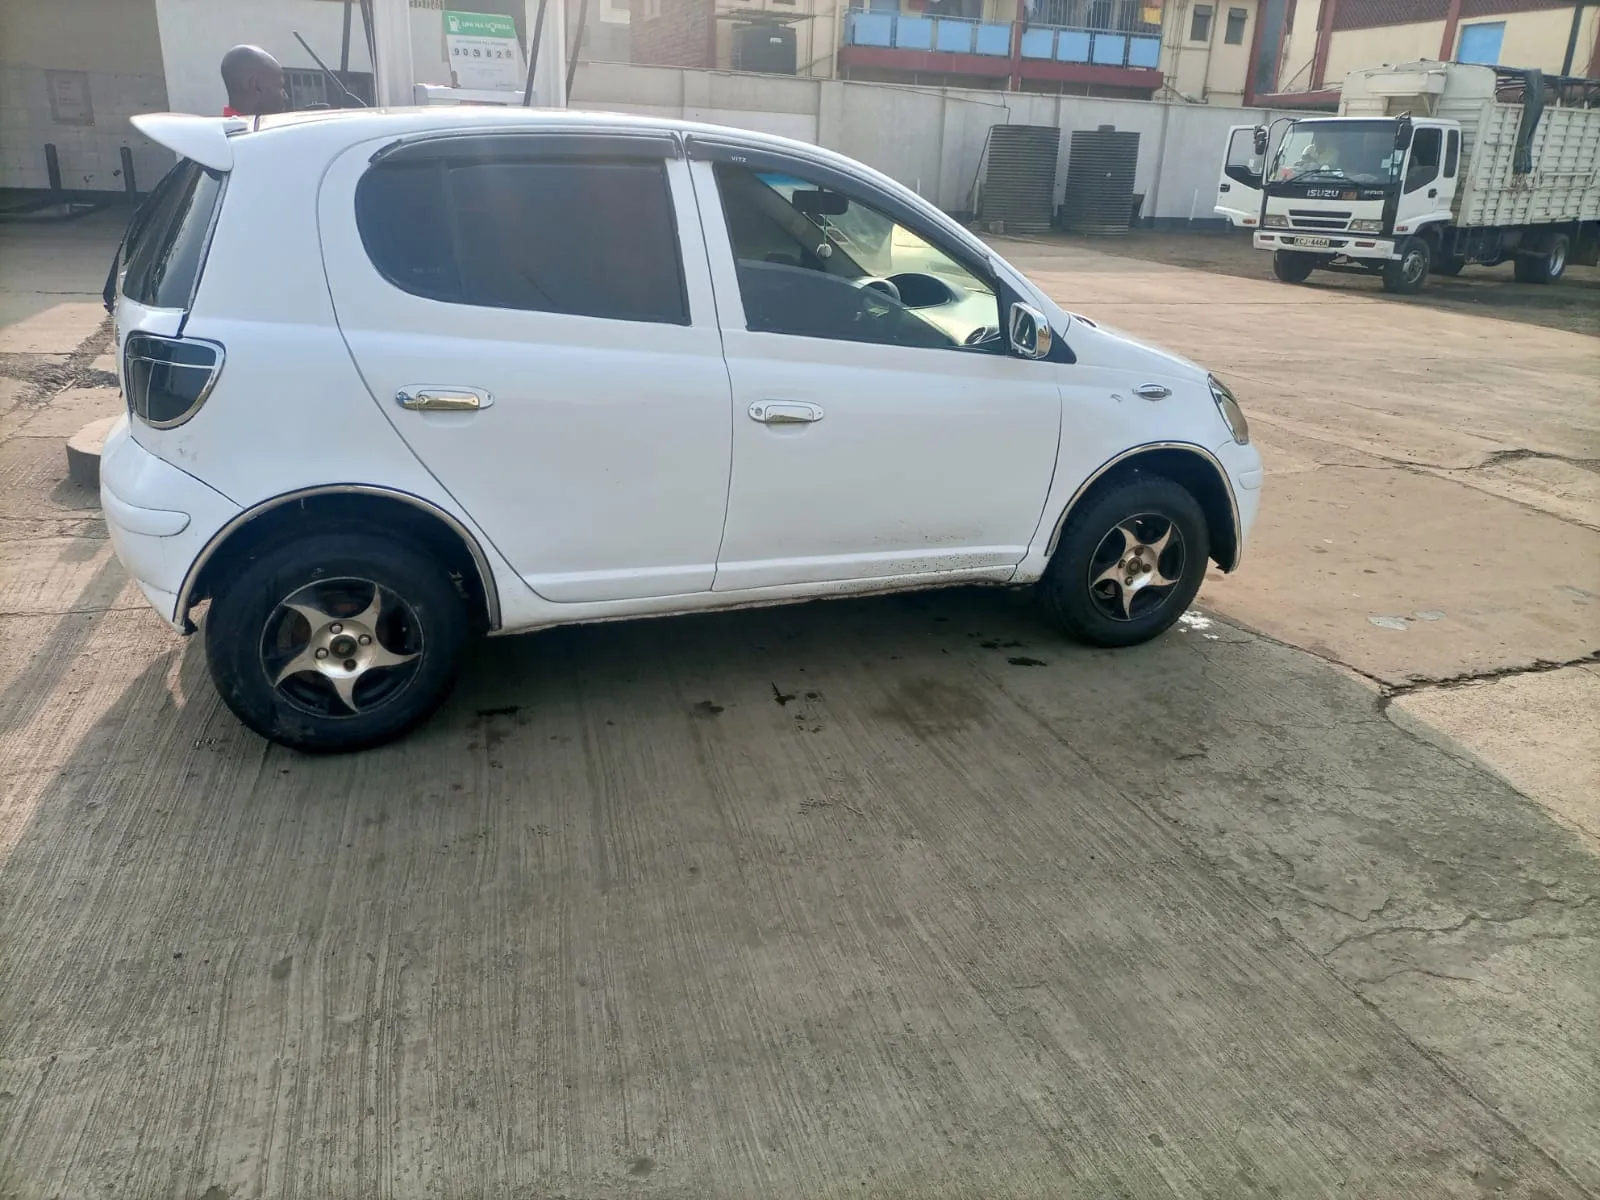 Cars For Sale/Vehicles Cars-Toyota Vitz 1300cc 290k Only You Pay 30% Deposit Trade in OK EXCLUSIVE 4